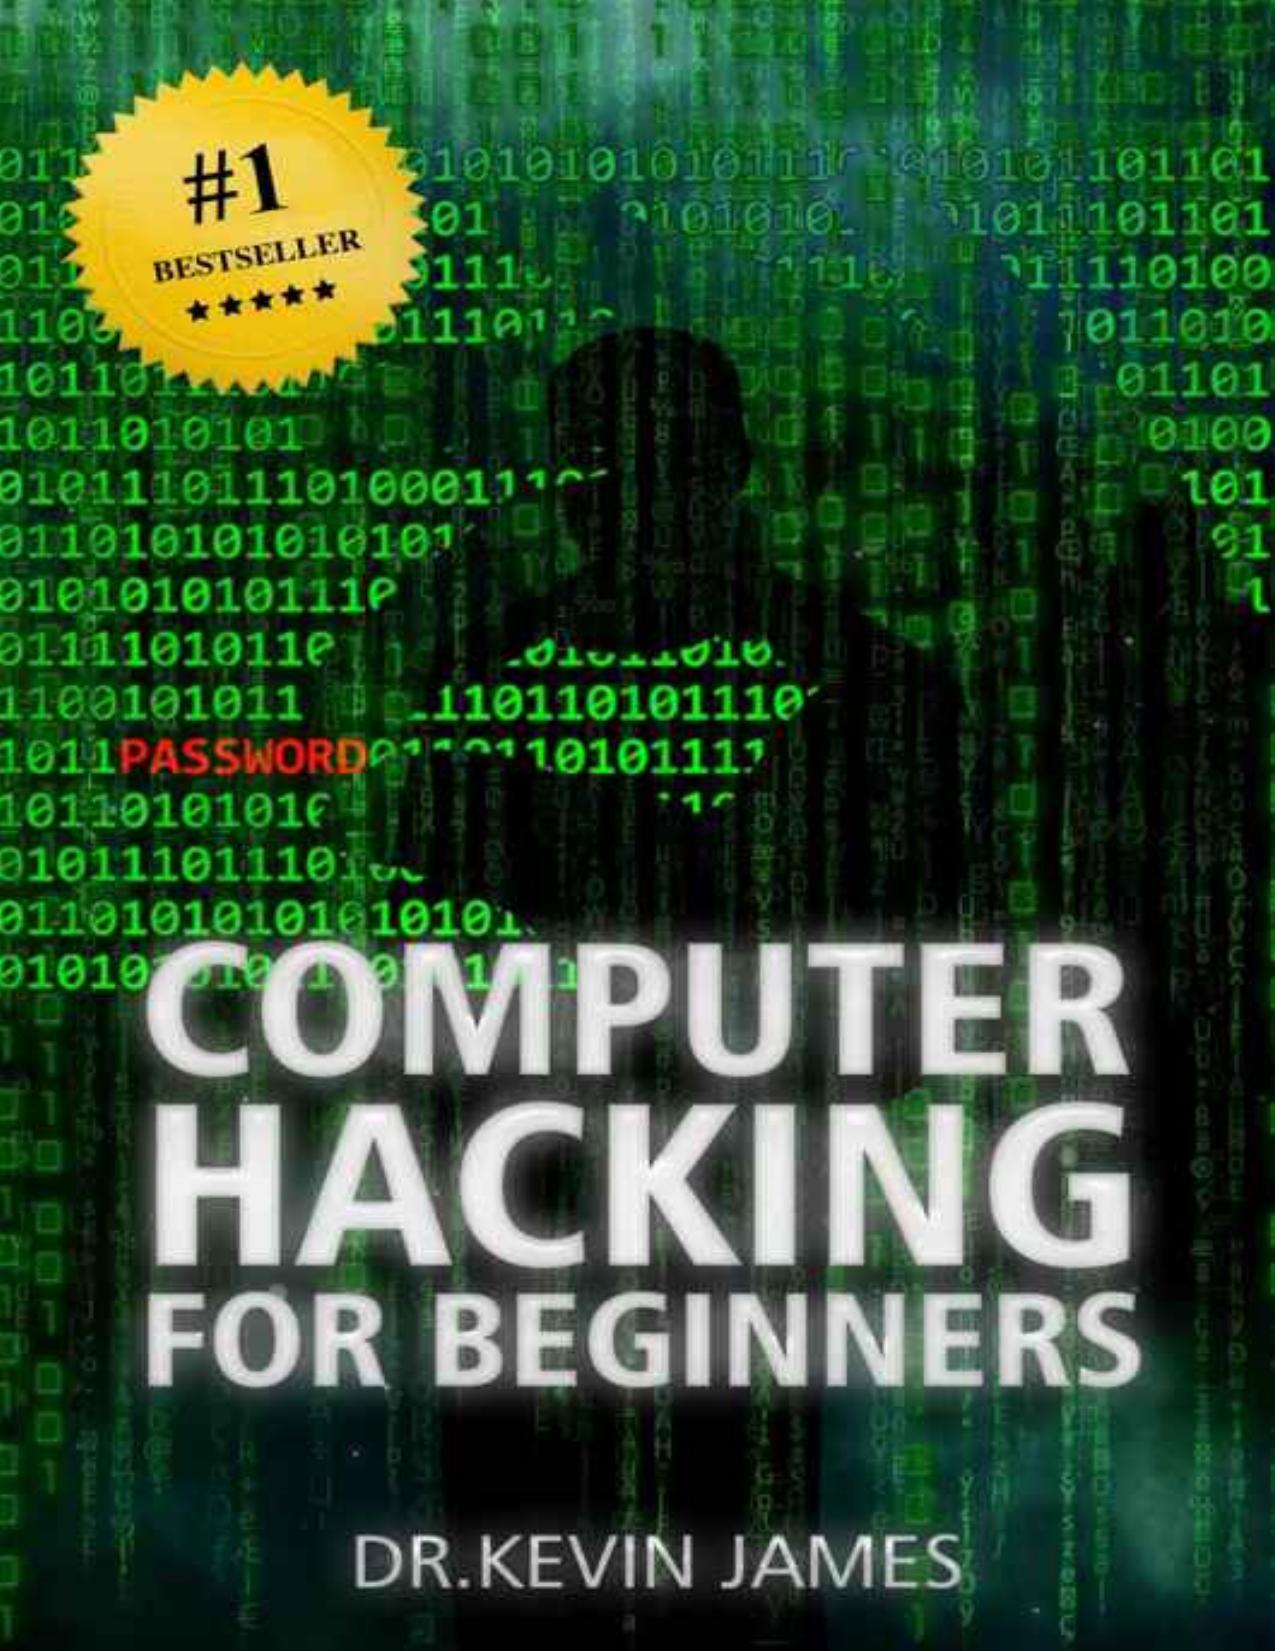 Computer Hacking for Beginners by Kevin James